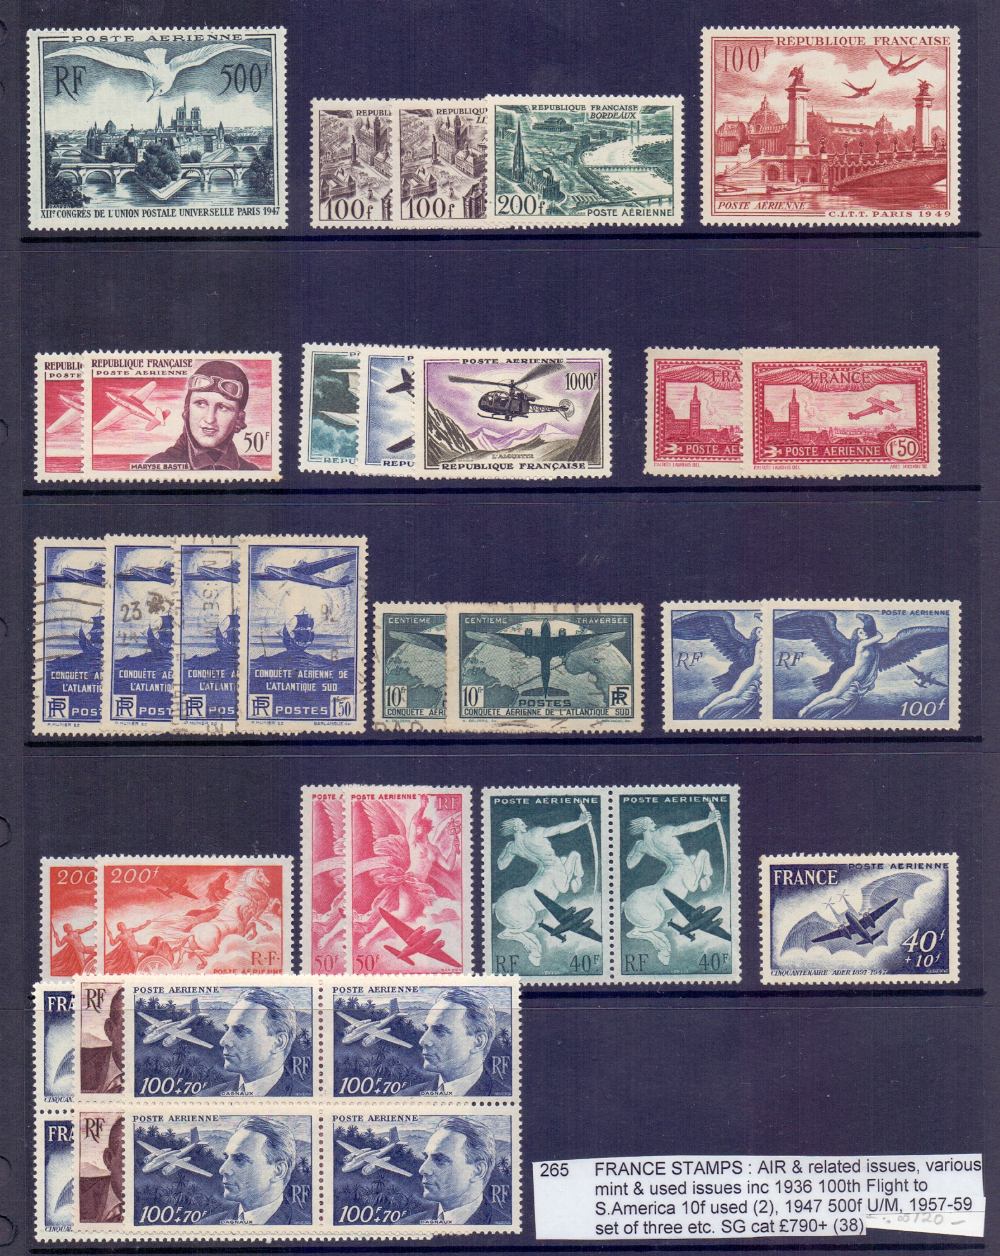 FRANCE STAMPS : AIR & related issues, various mint & used inc 1936 100th Flight to S.